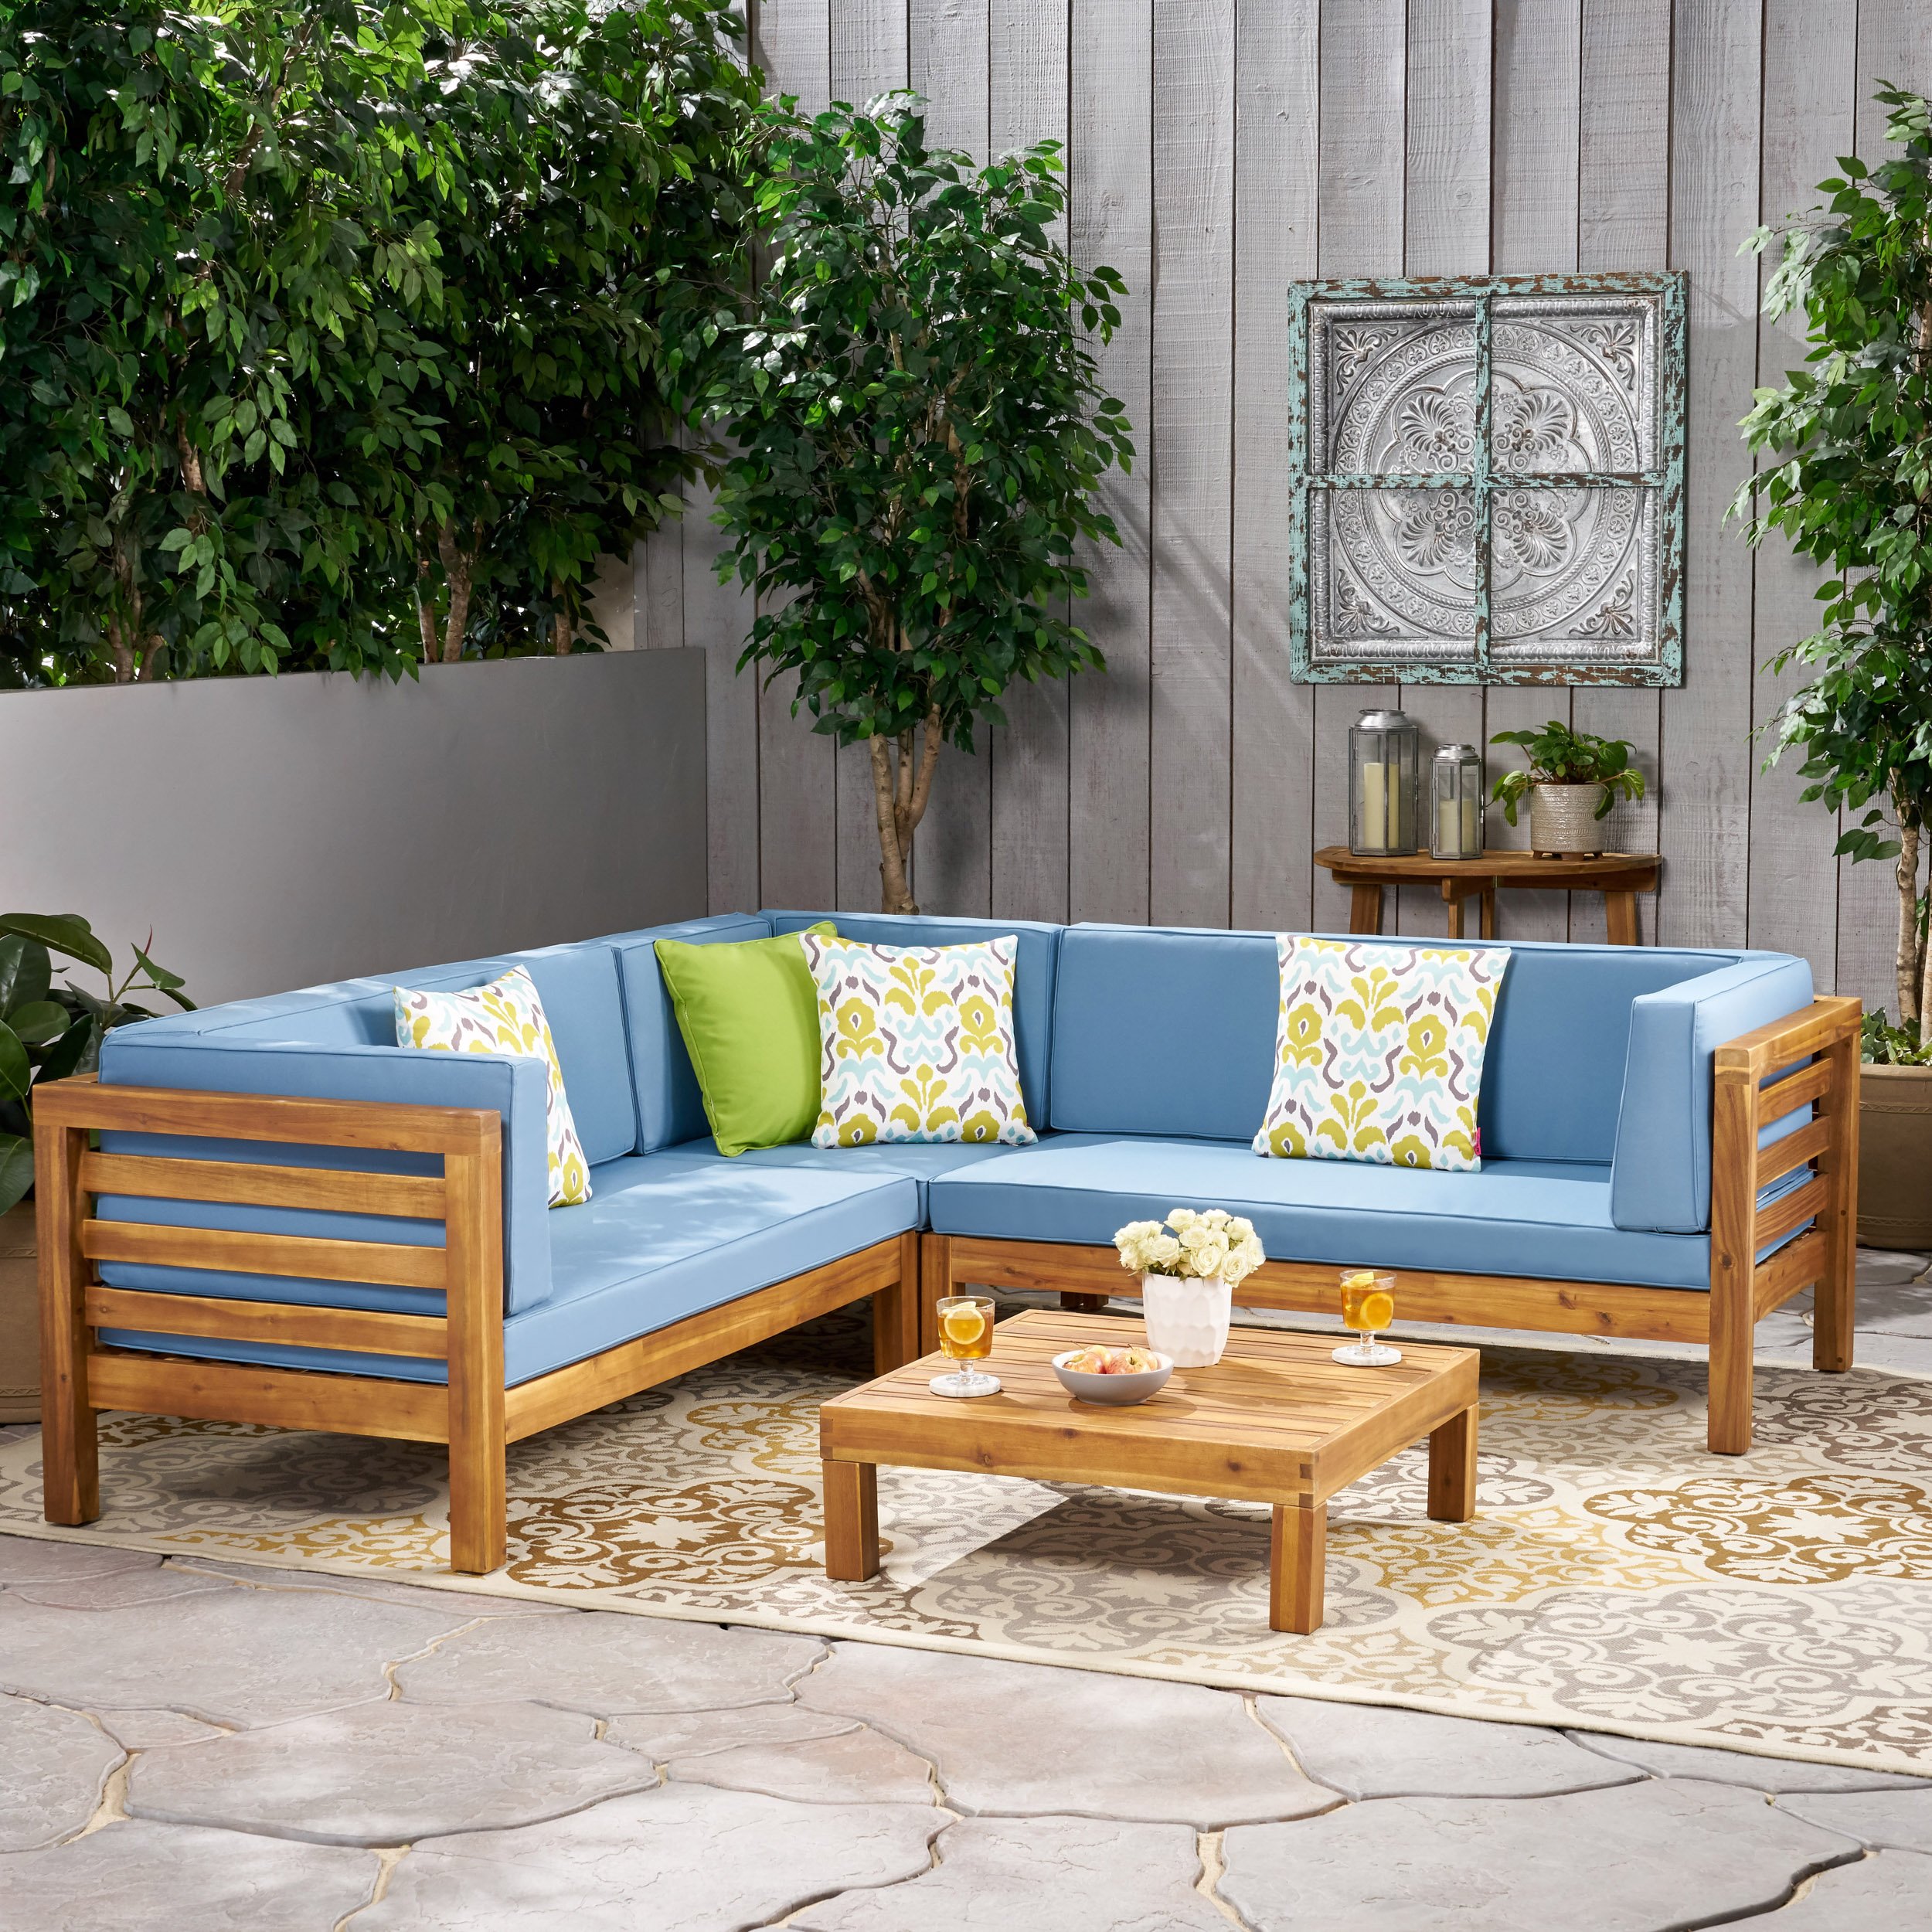 Ravello 4 Piece Outdoor Wooden Sectional Set With Dark Grey Cushions - Beige, Gray